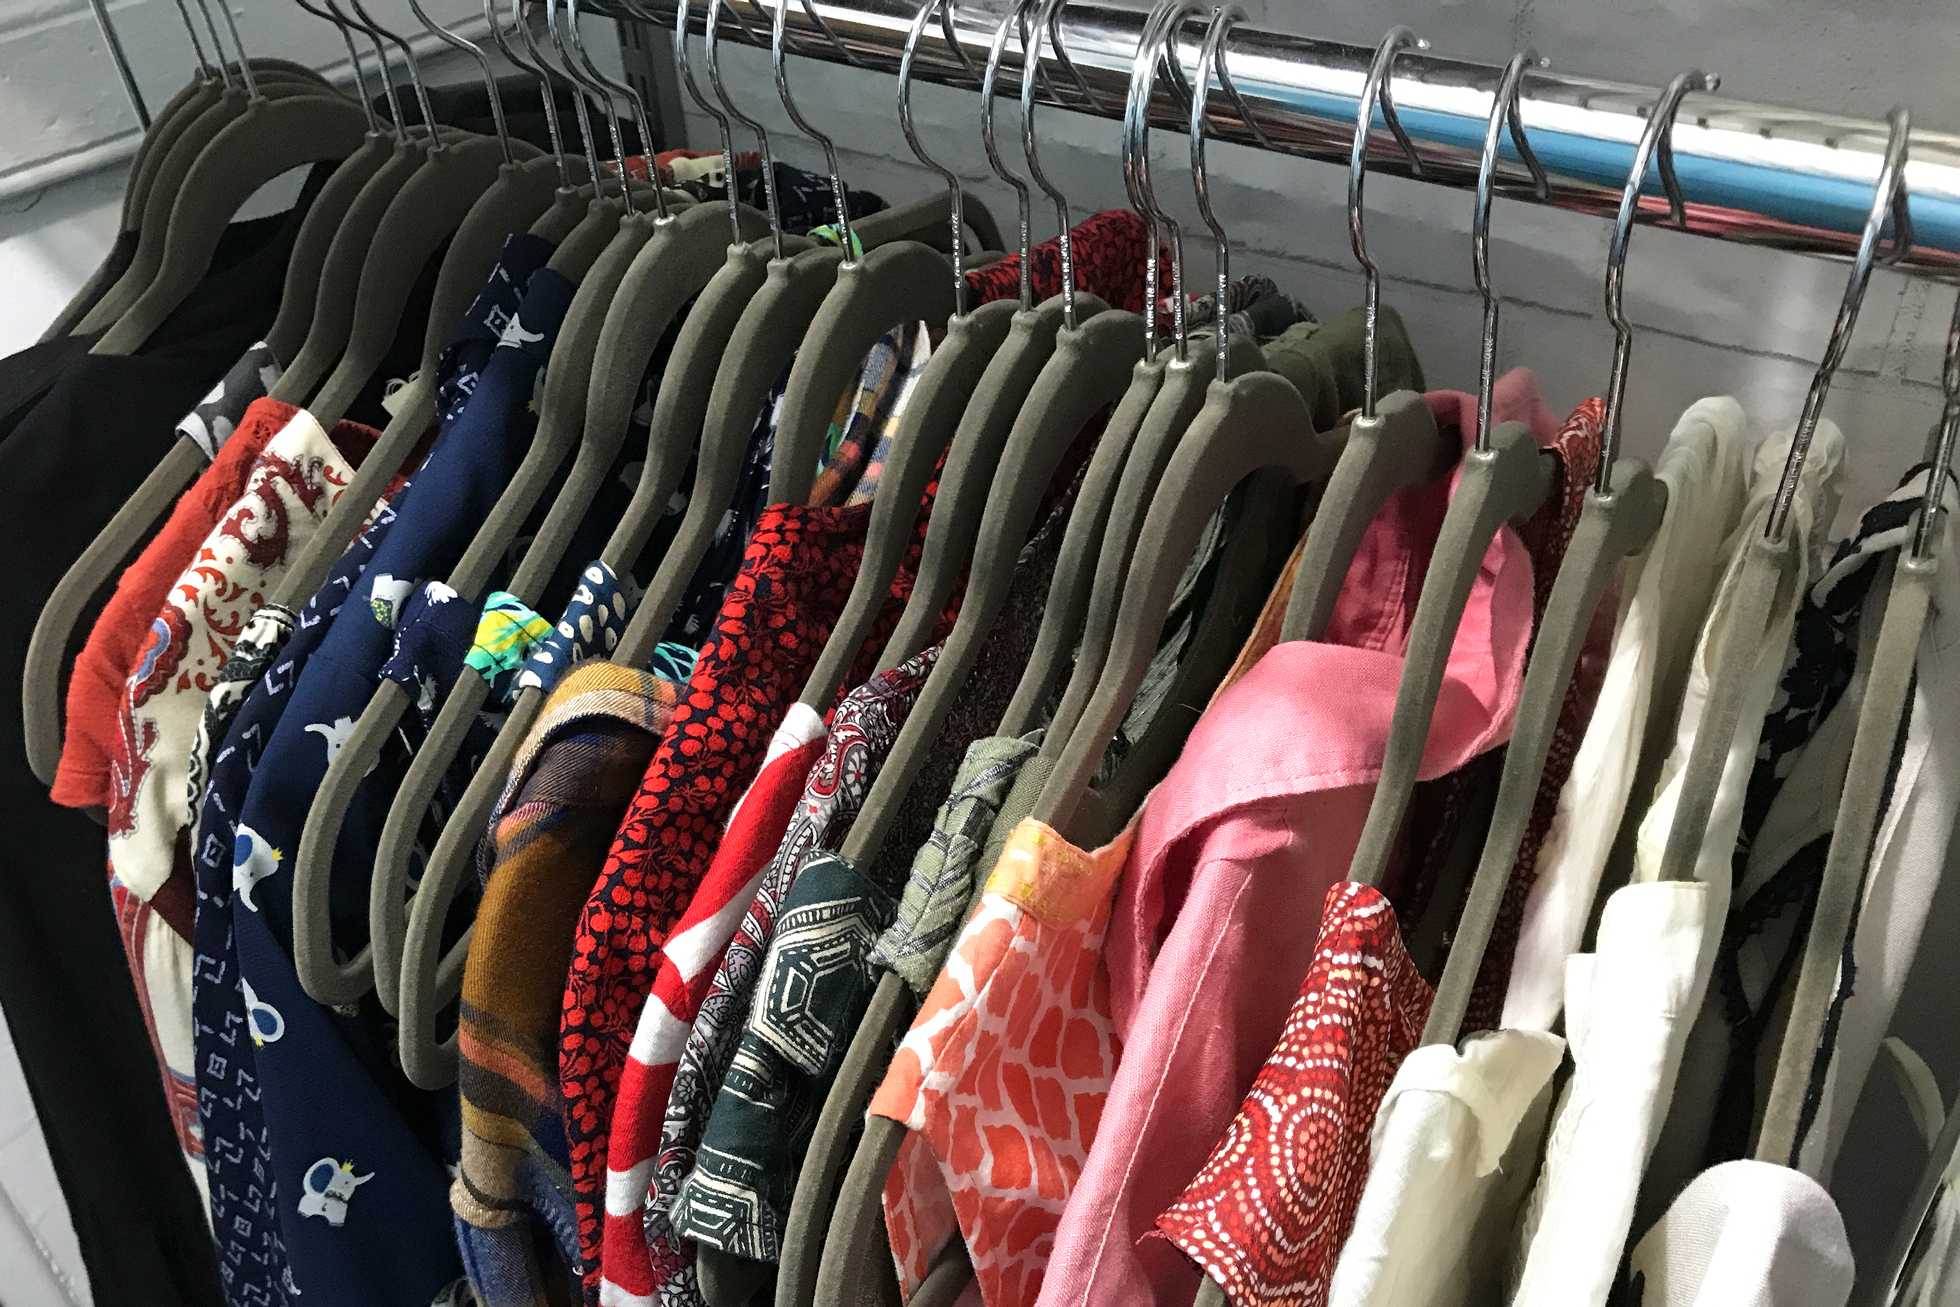 Gray felt hangers in a closet with colorful shirts